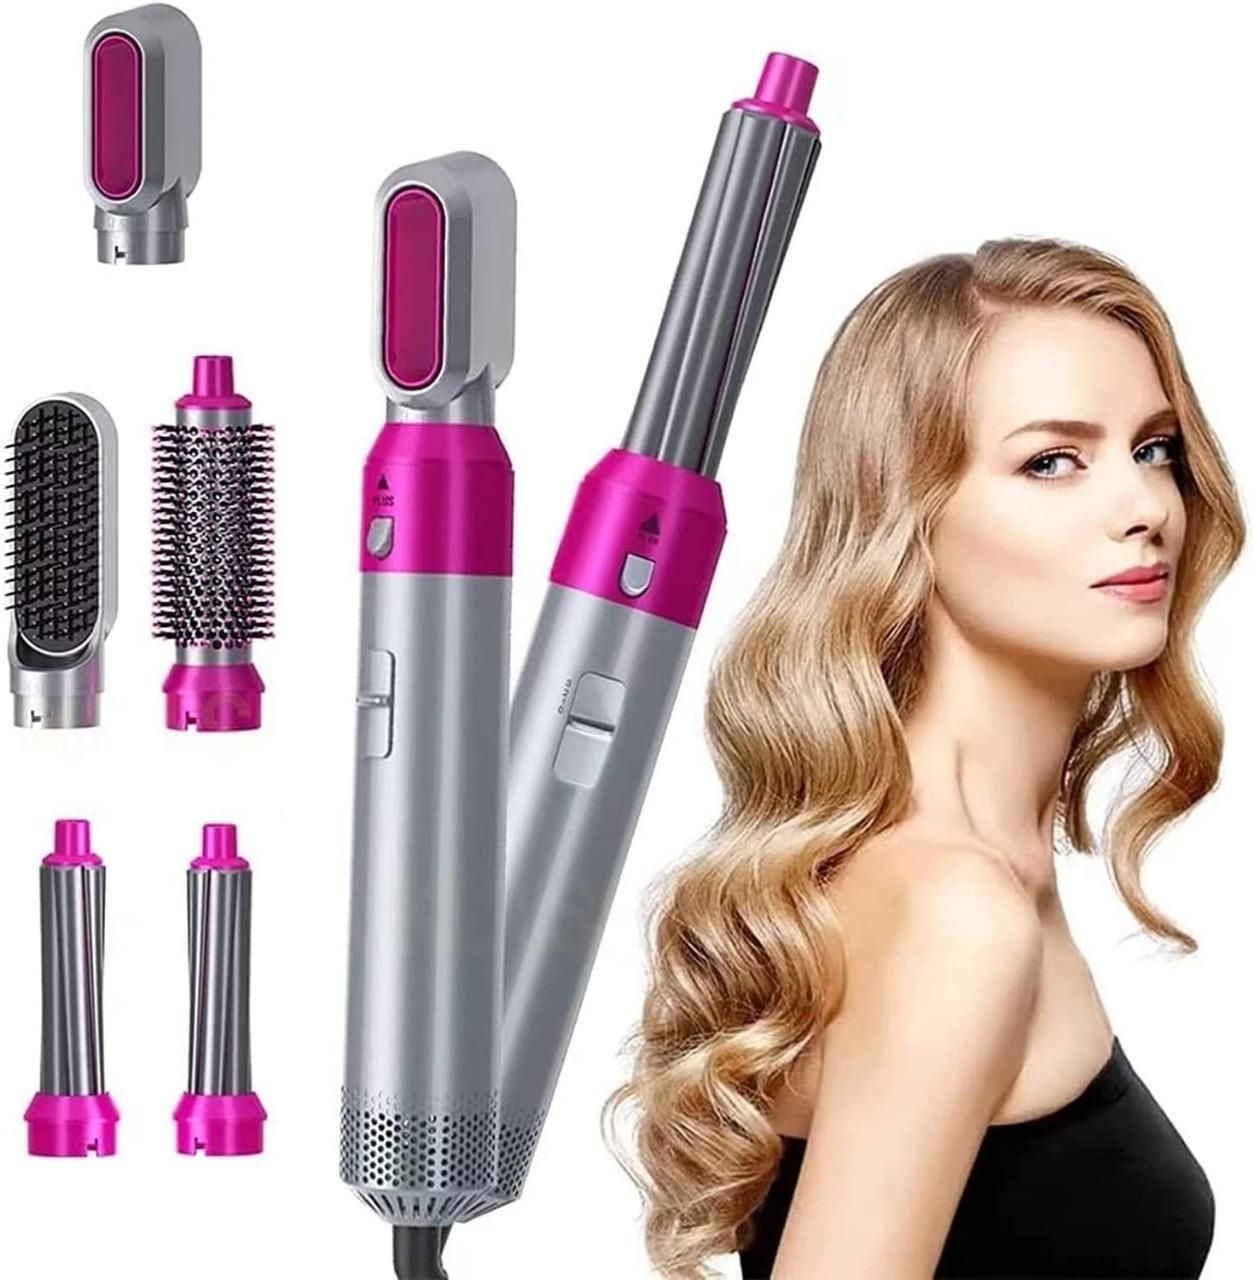 Professional Hair Styling Kit (5 in 1)